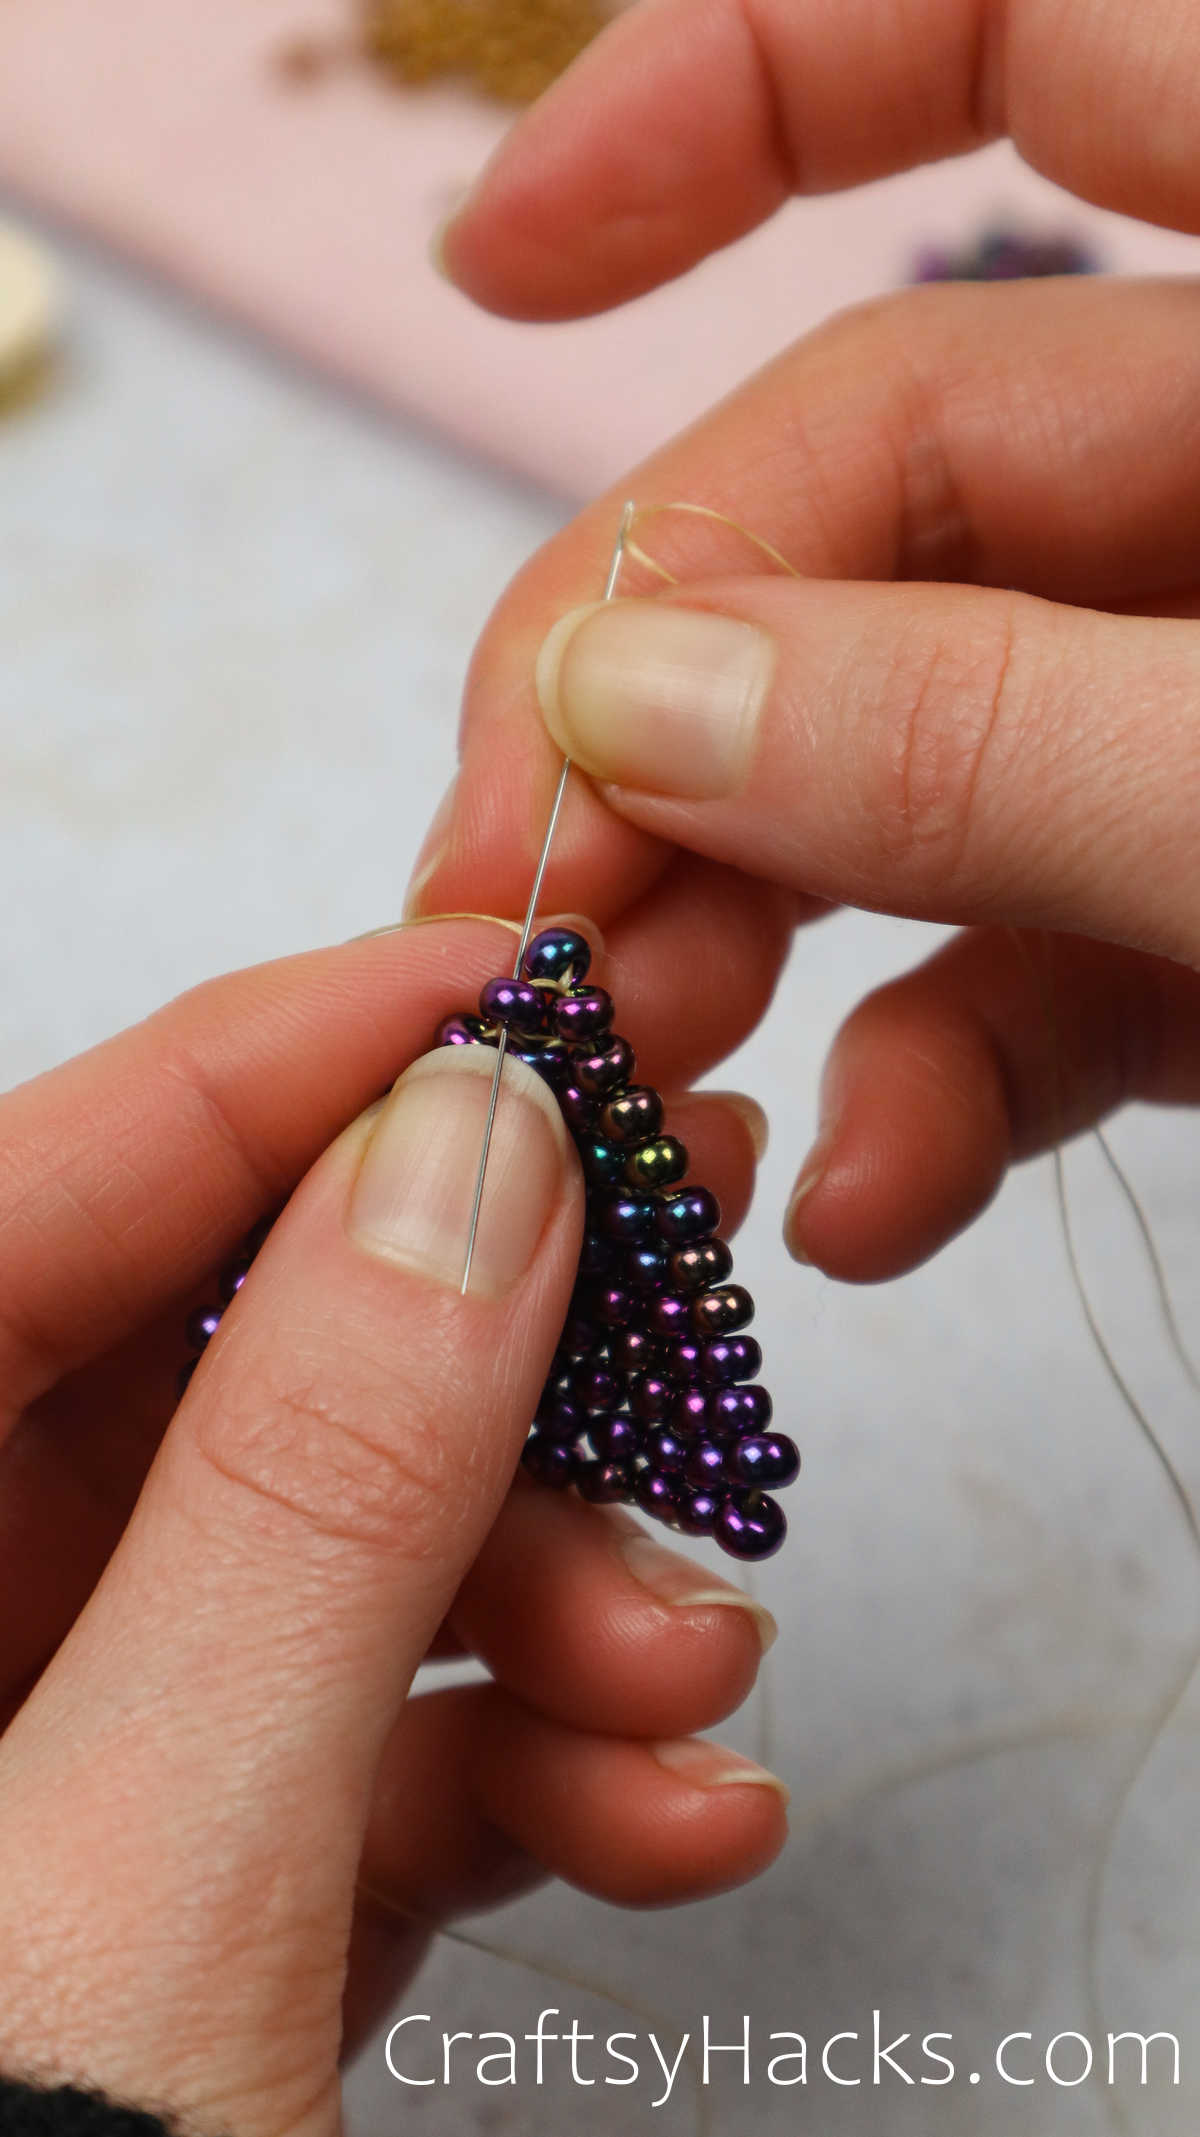 looping the beads together to secure